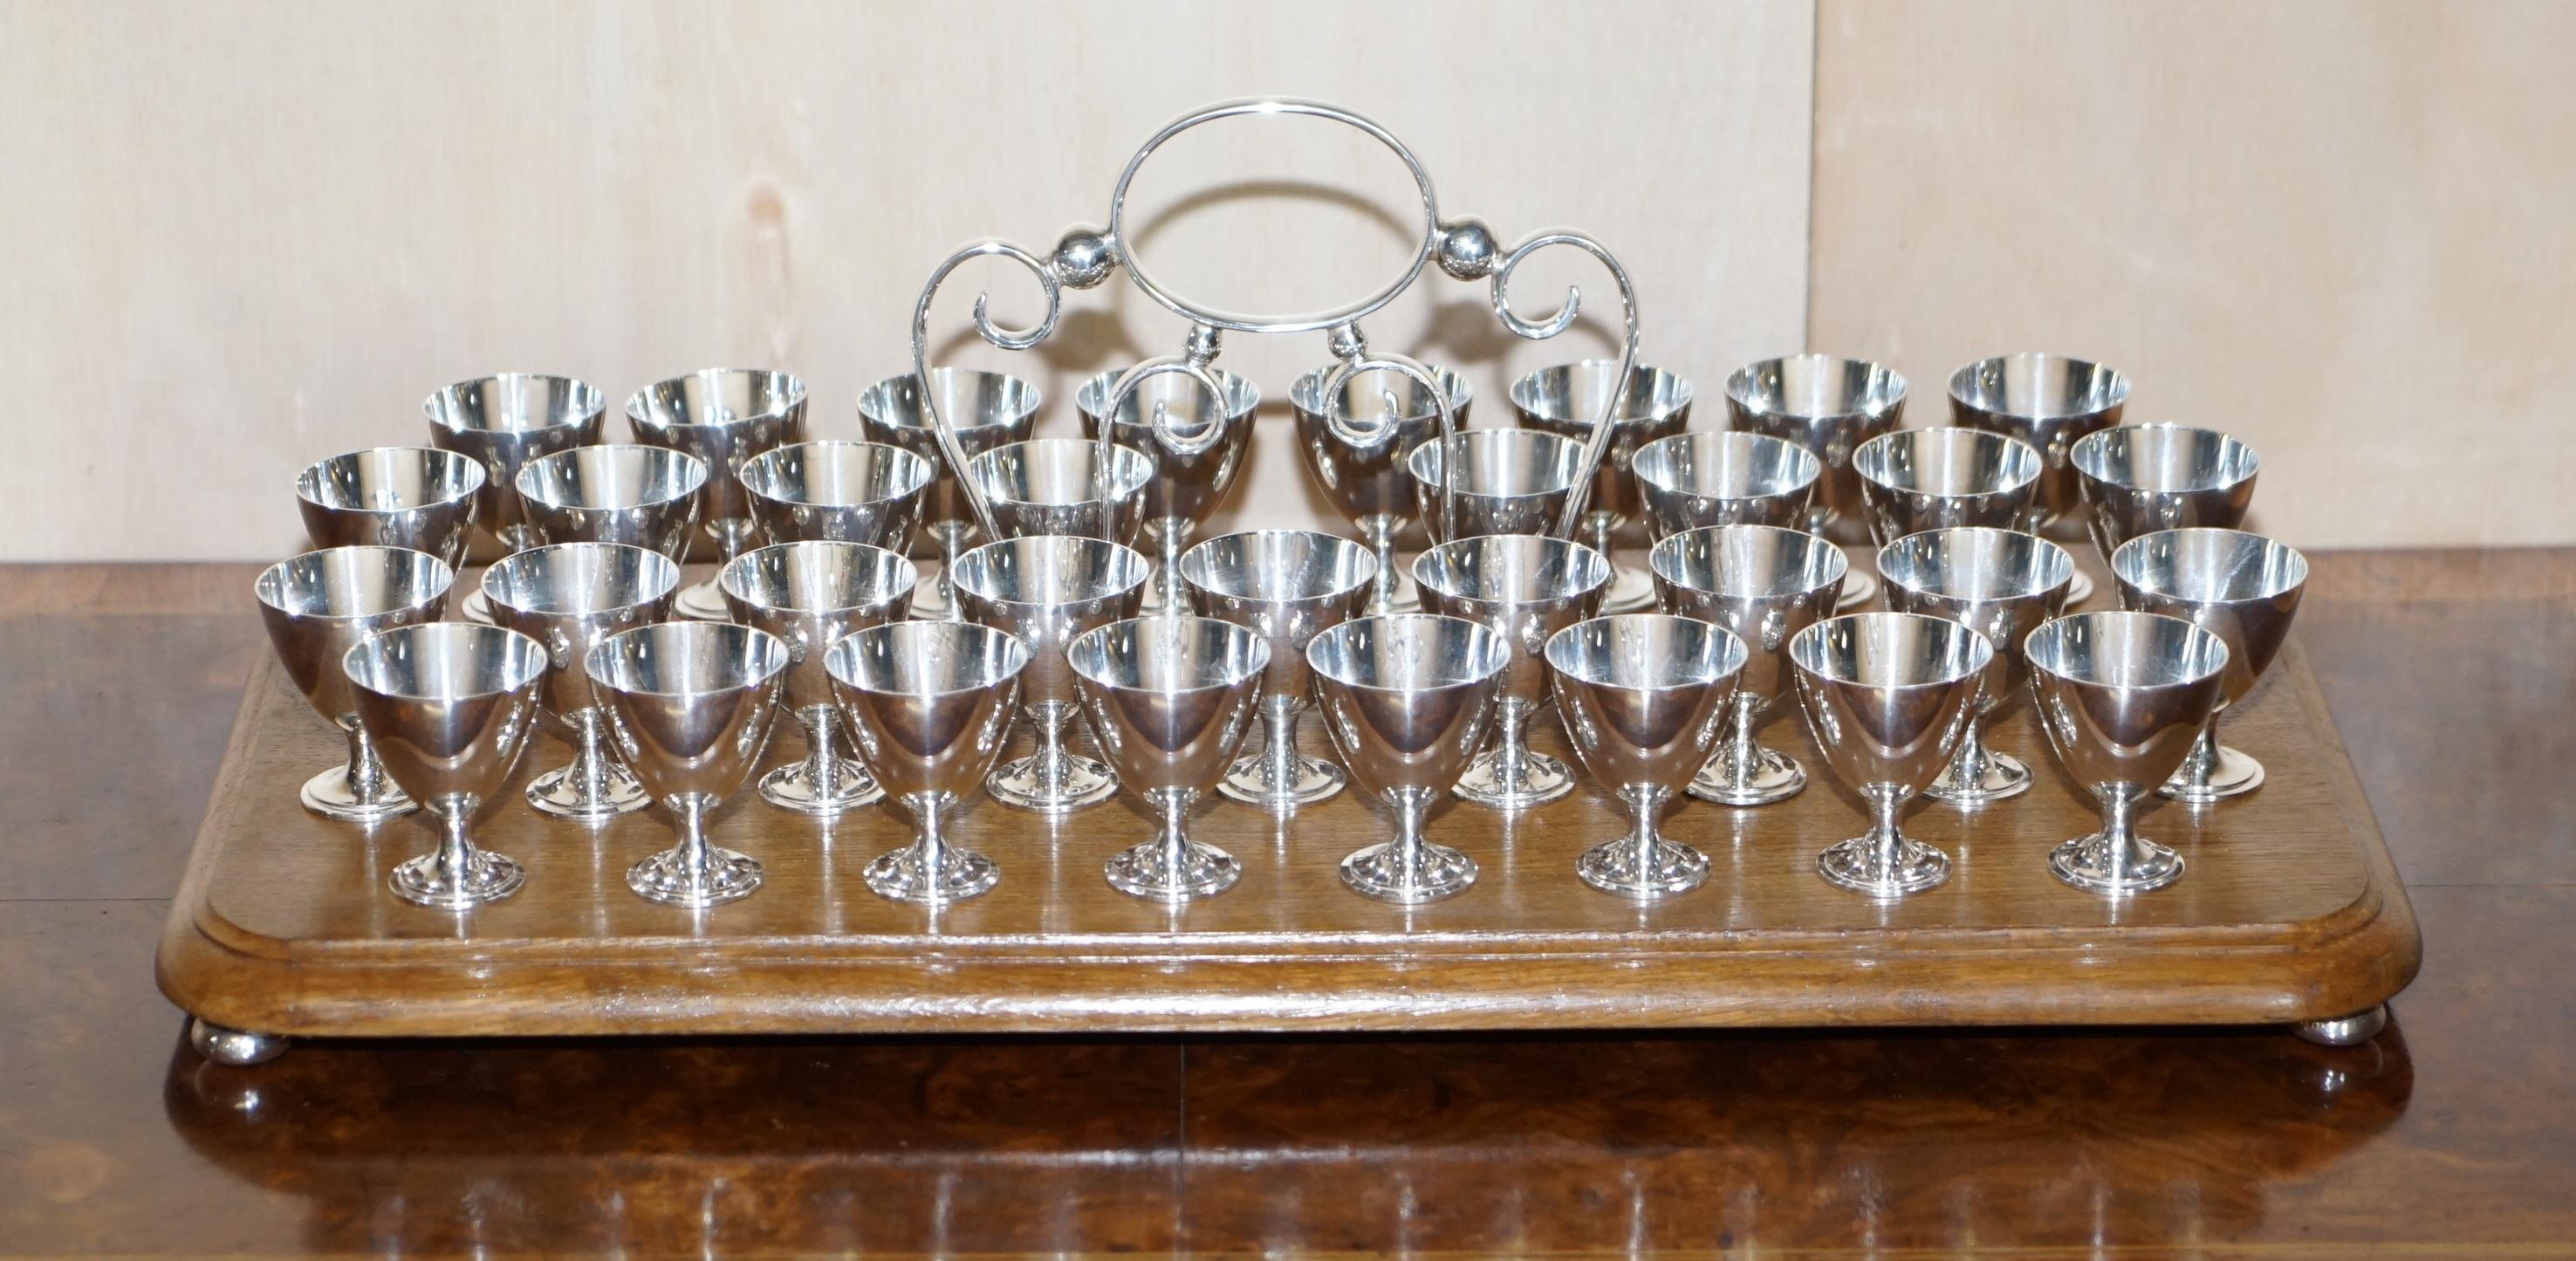 We are delighted to offer for sale this lovely antique tray with 37 EPNS shot cups originally designed as a communion tray

A good looking well made and decorative suite, used in party’s up and down as cool shot trays, a far cry from the original